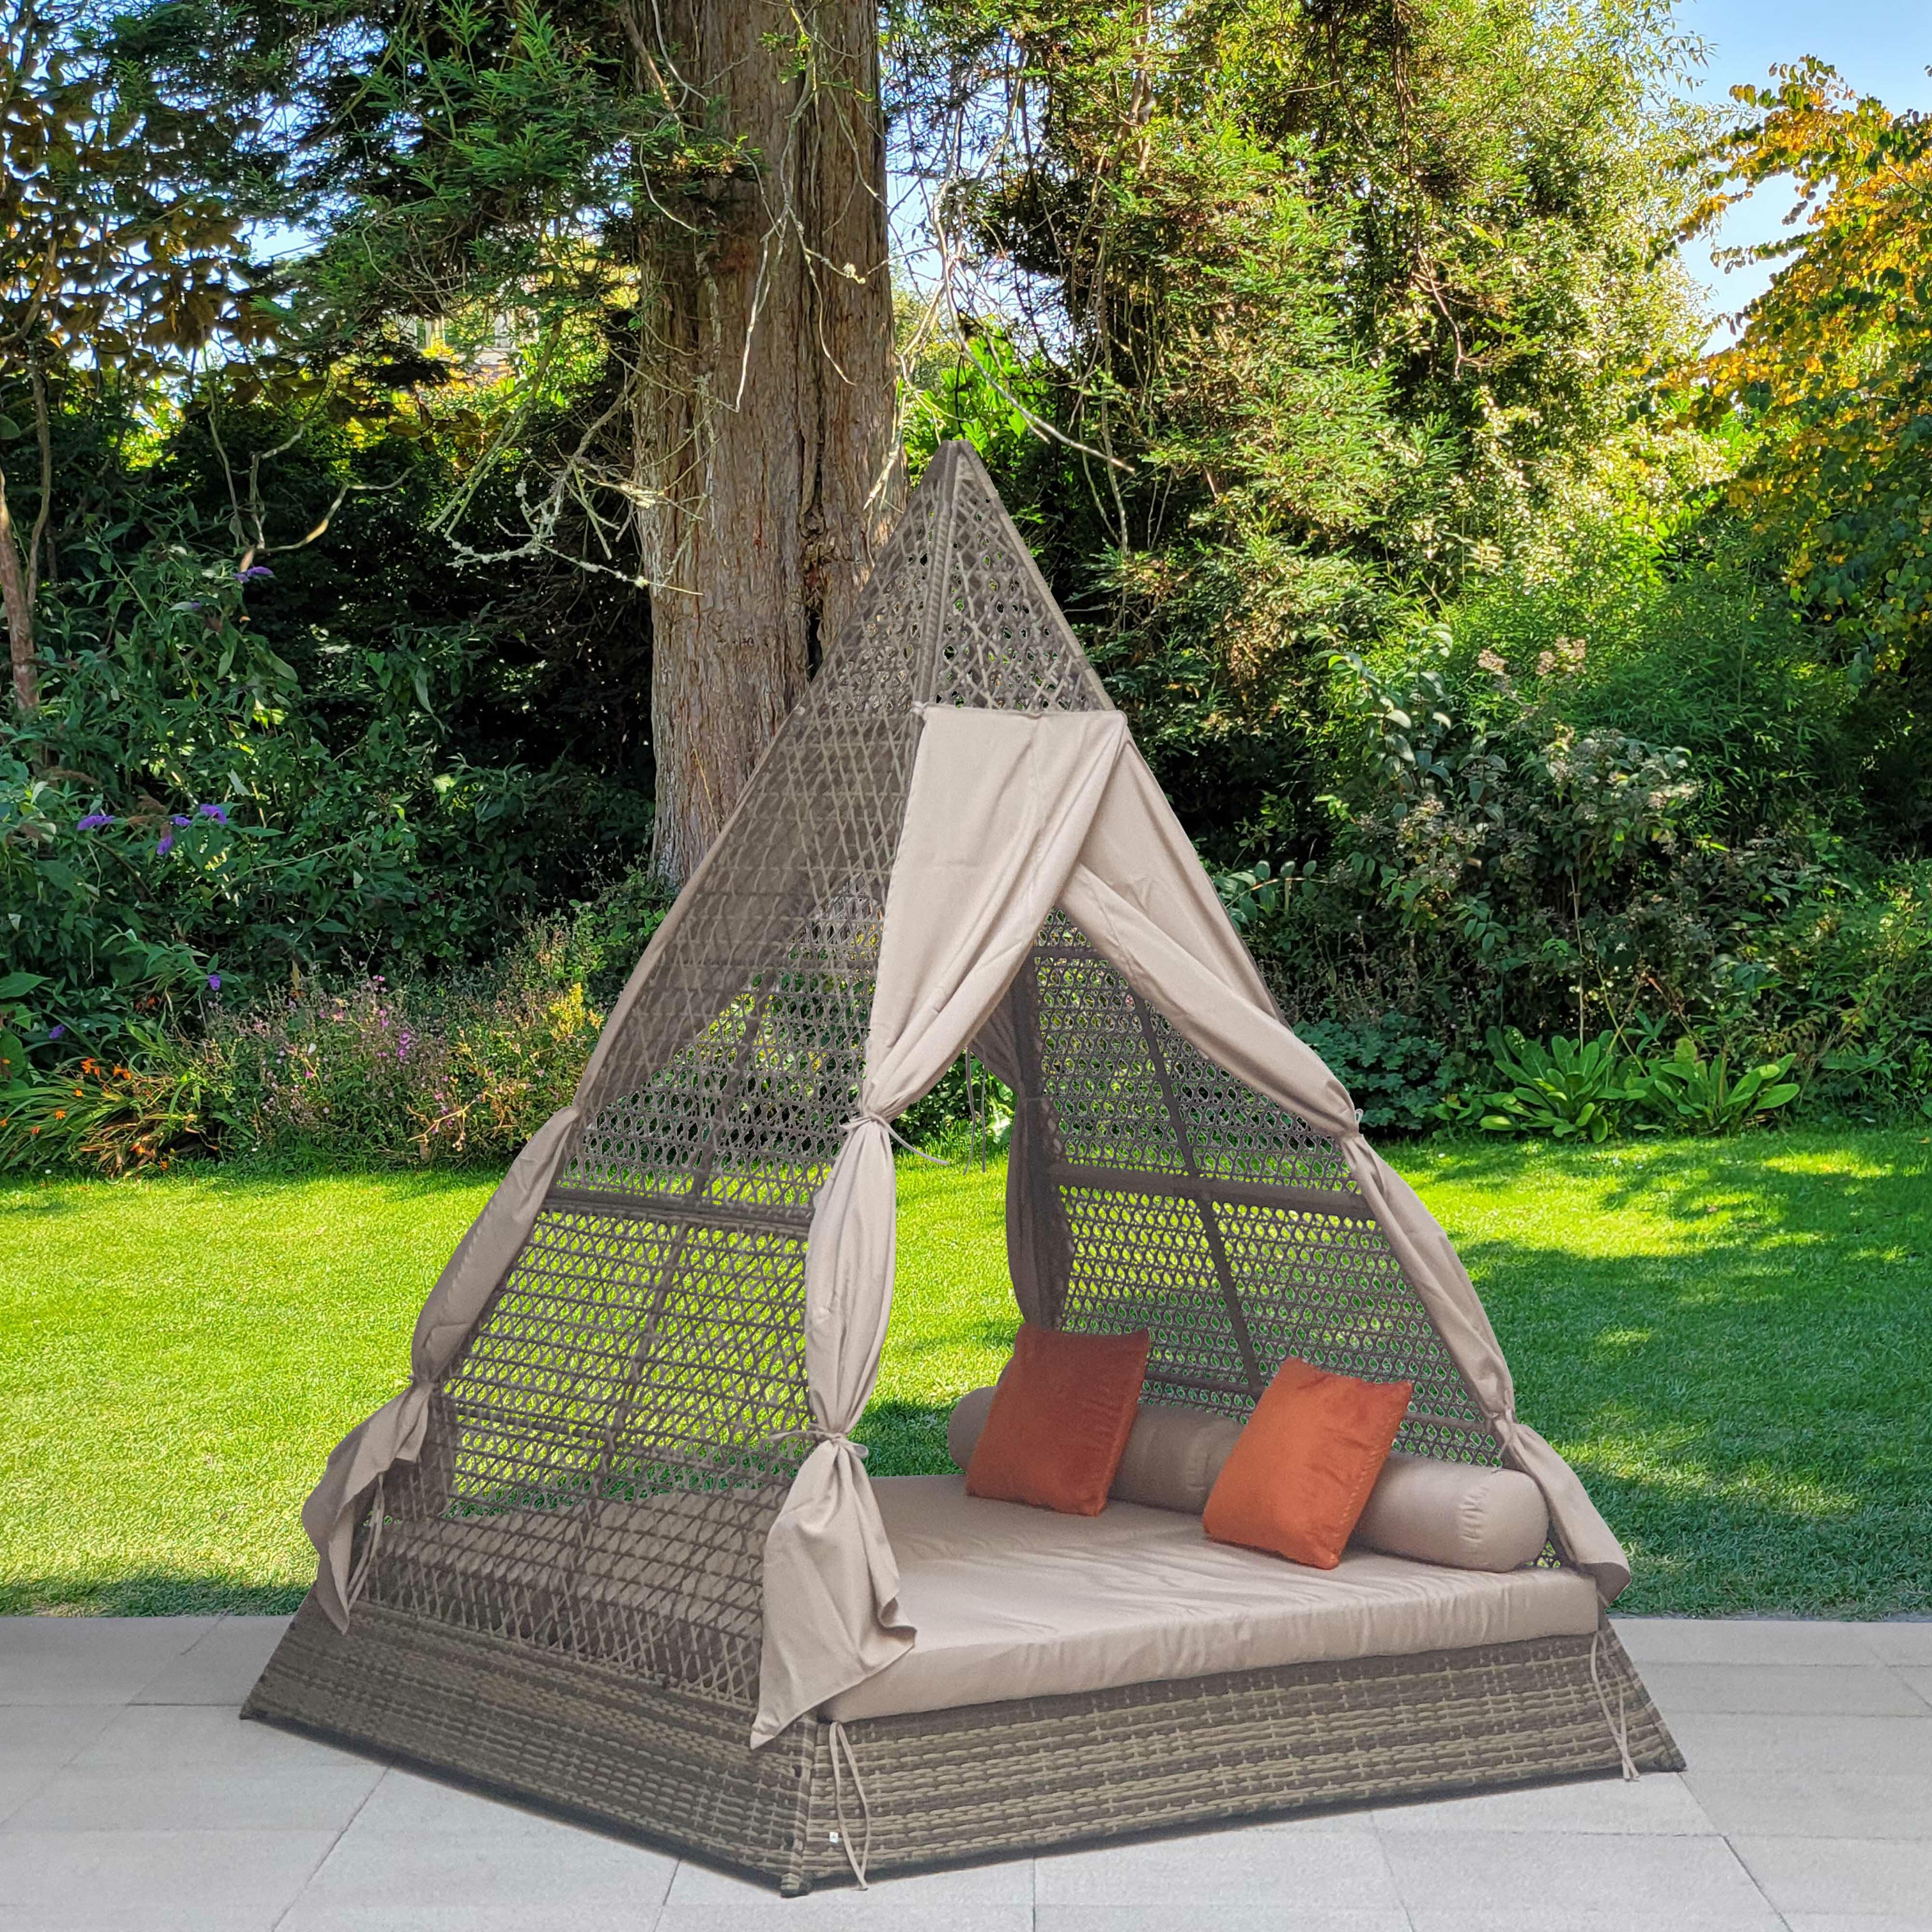 An image of Signature Weave Teepee Daybed Garden Furniture